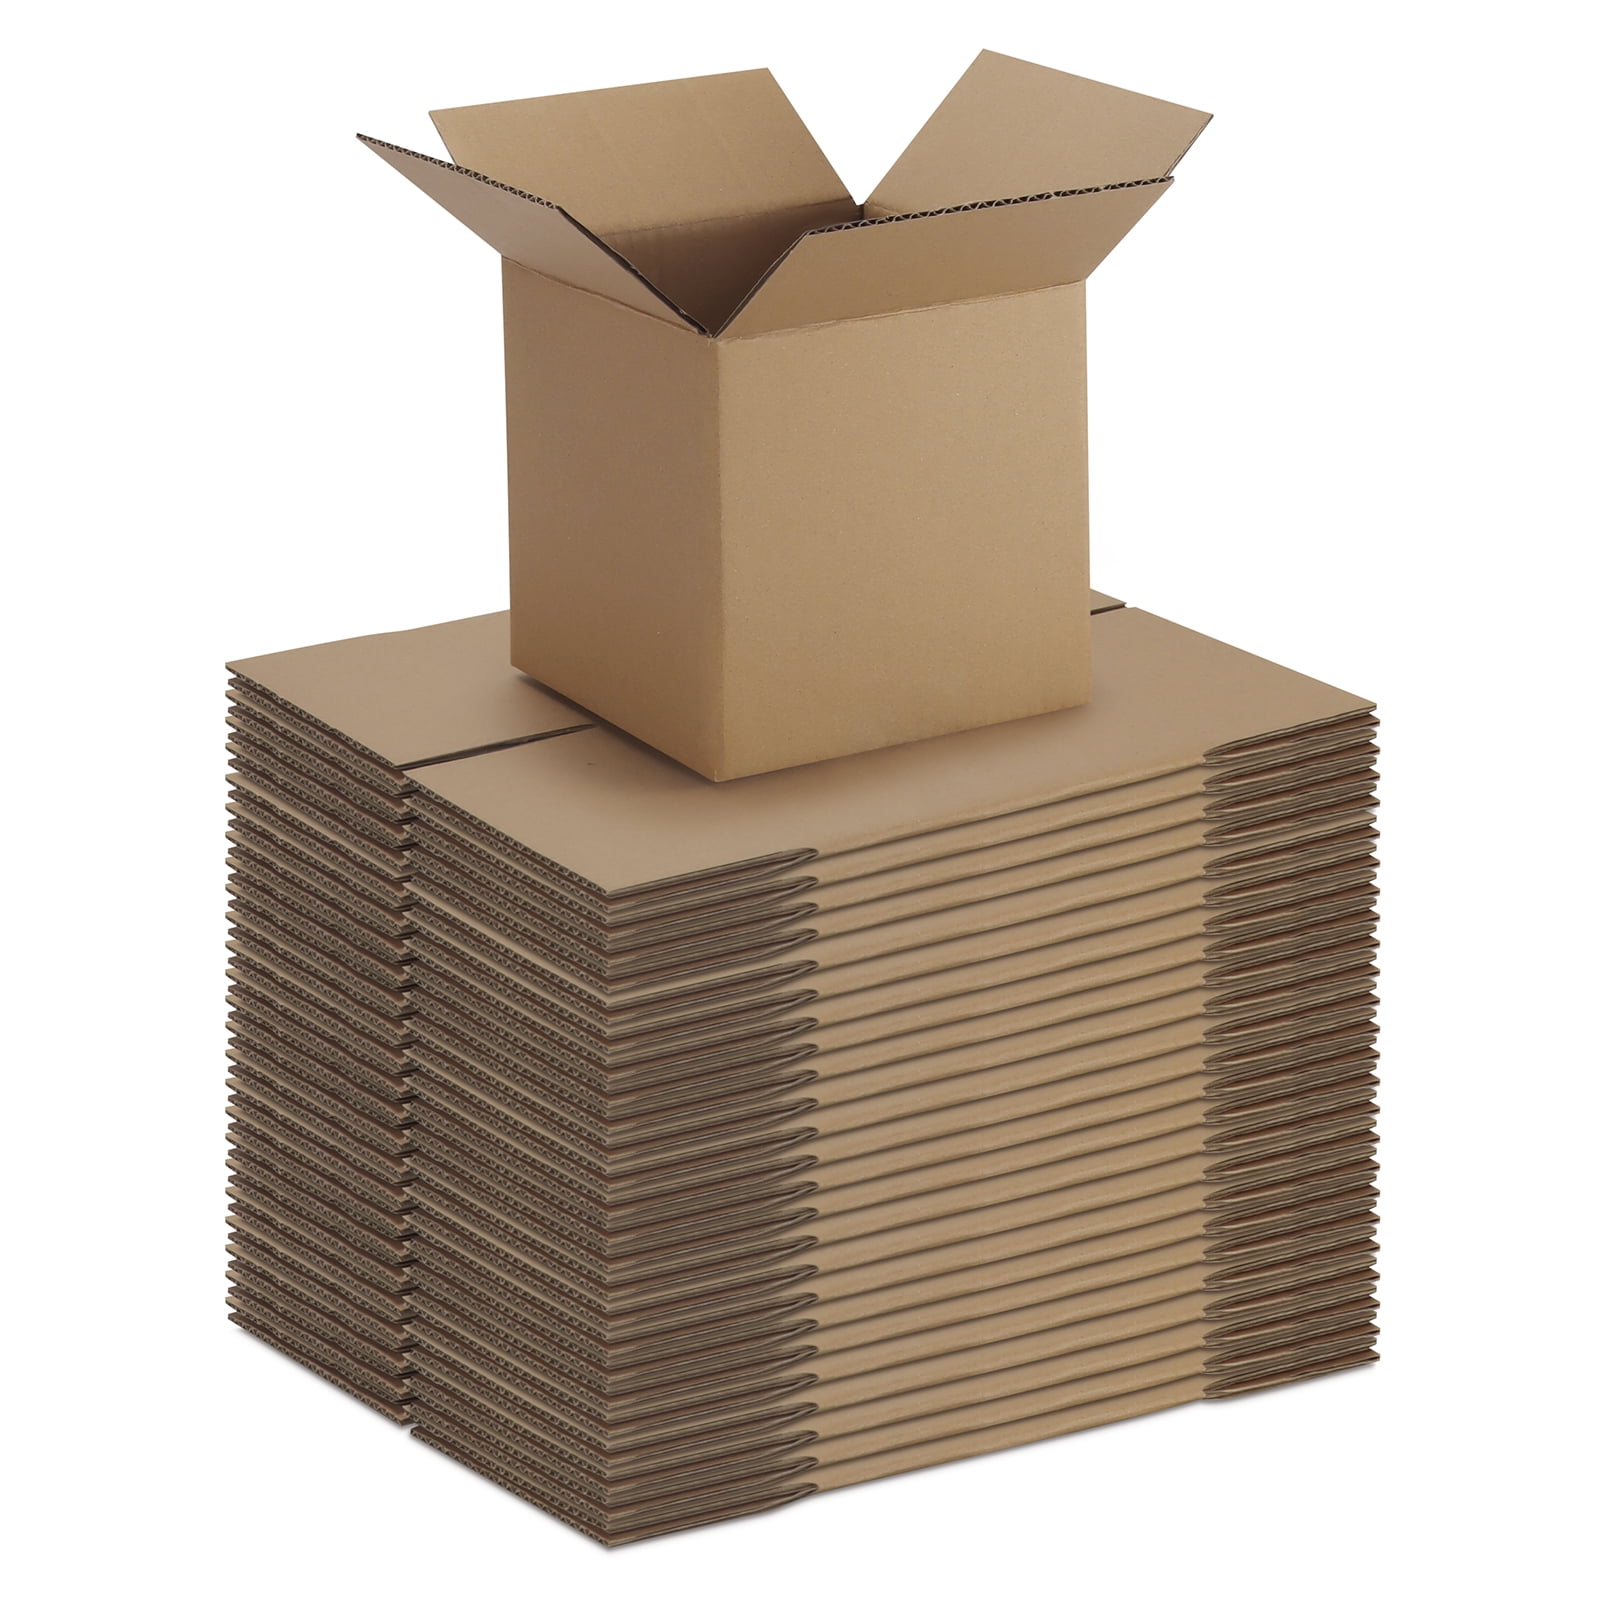 Lot of 10 Brown Corrugated Shipping Mailer Box 8.65"x4"x1.25" 22x10x3.25 cm 